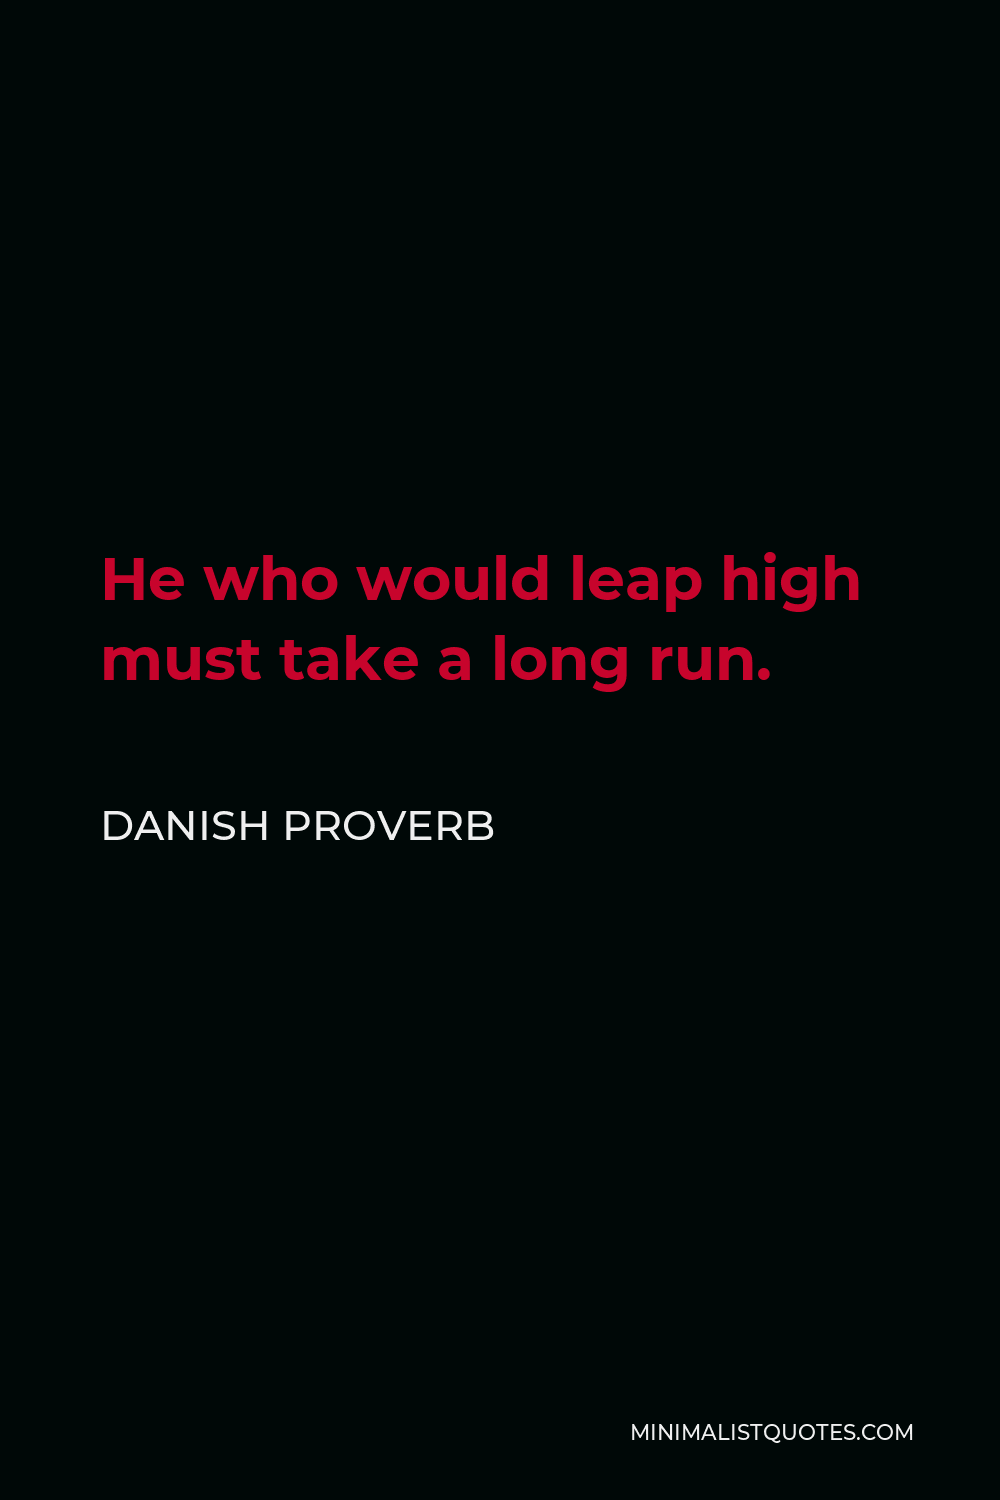 Danish Proverb Quote - He who would leap high must take a long run.